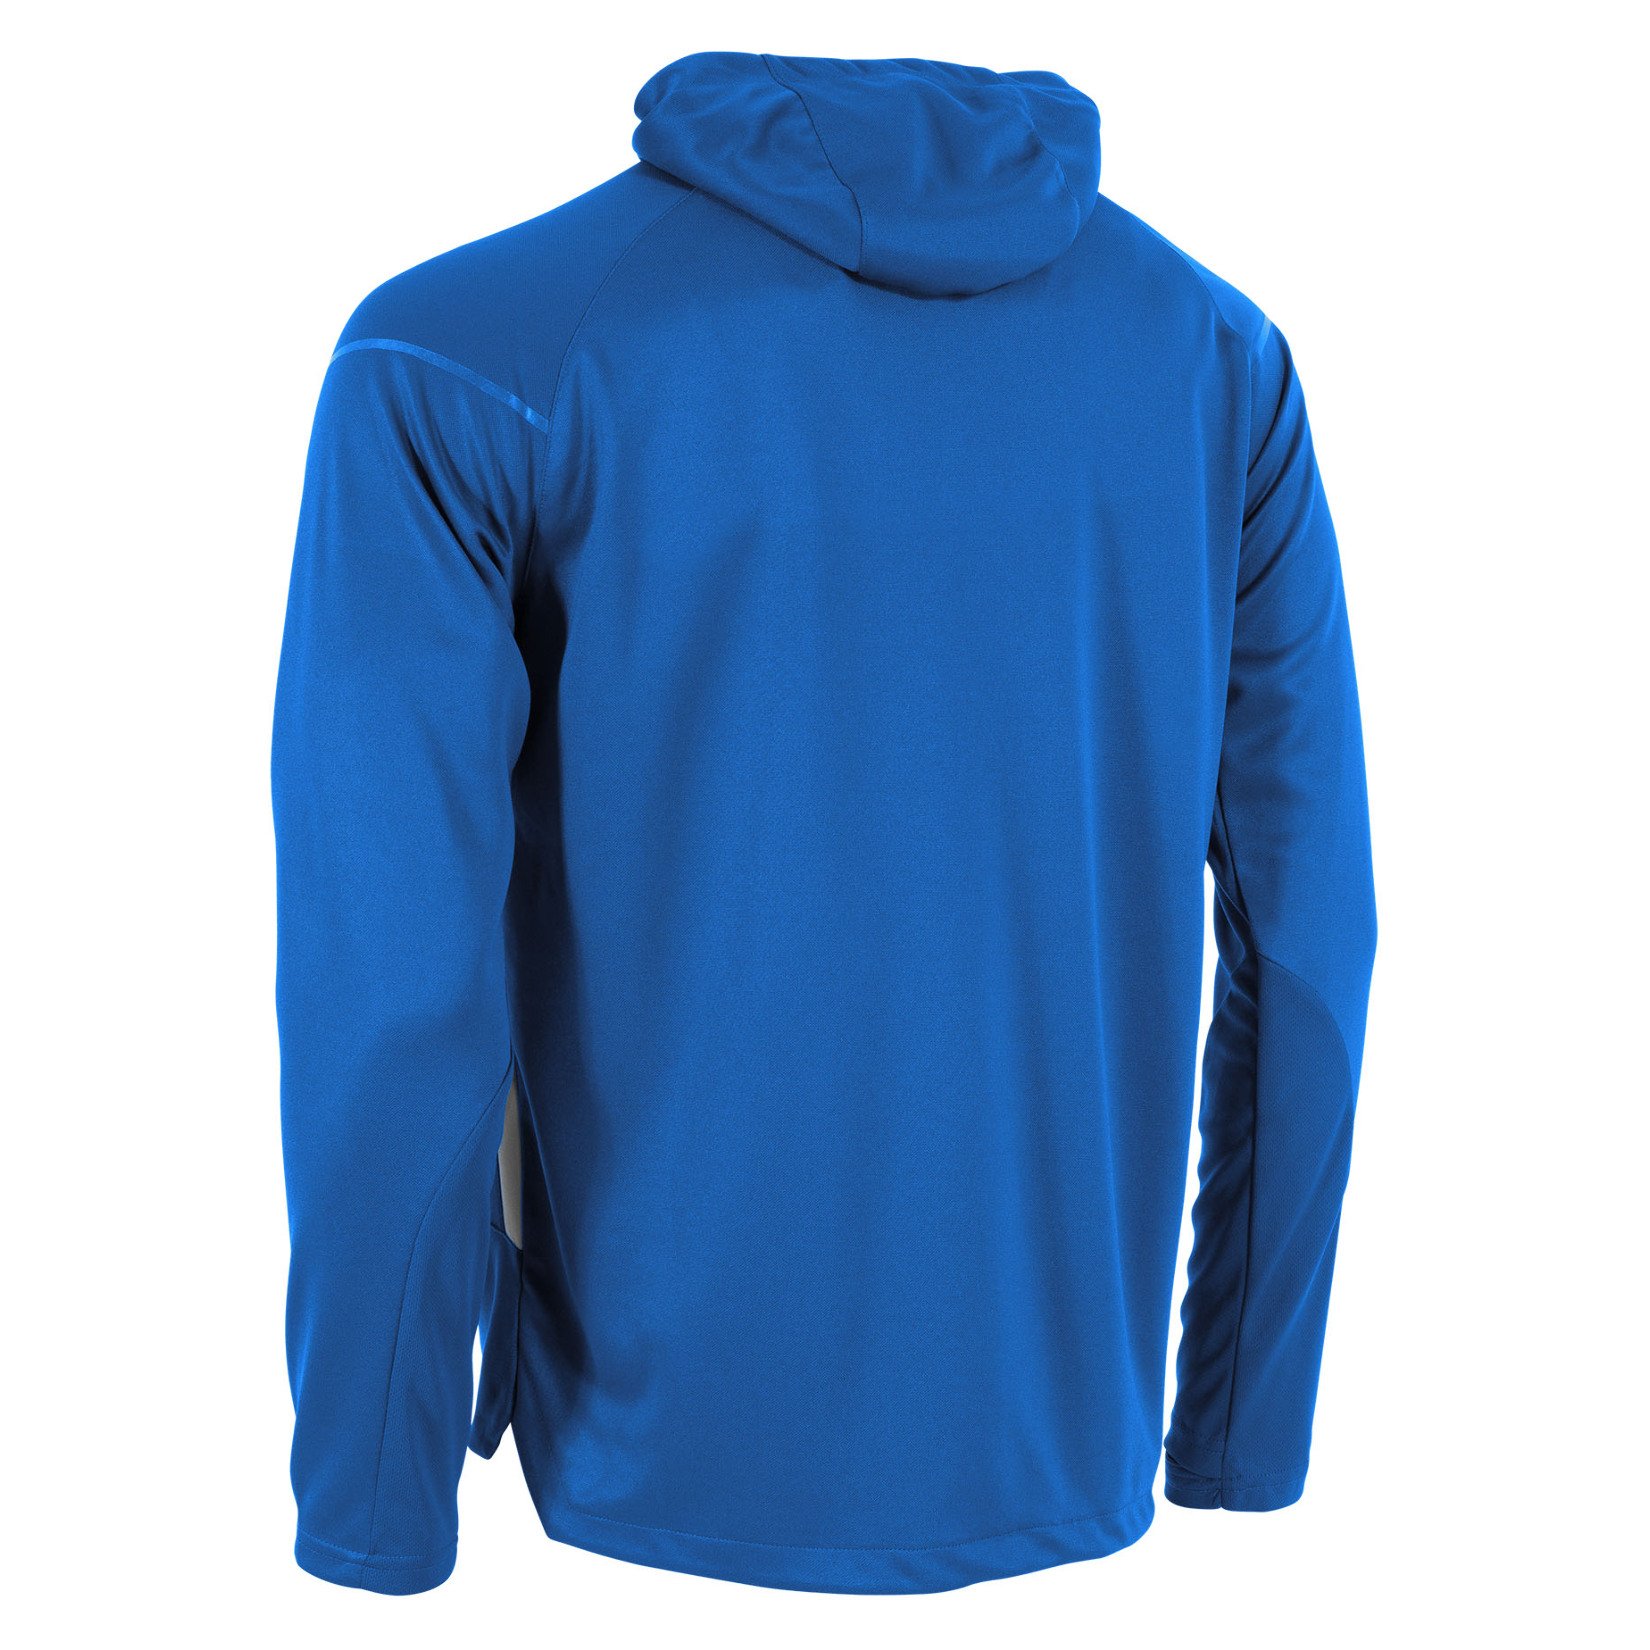 Stanno First Hooded Full Zip Top